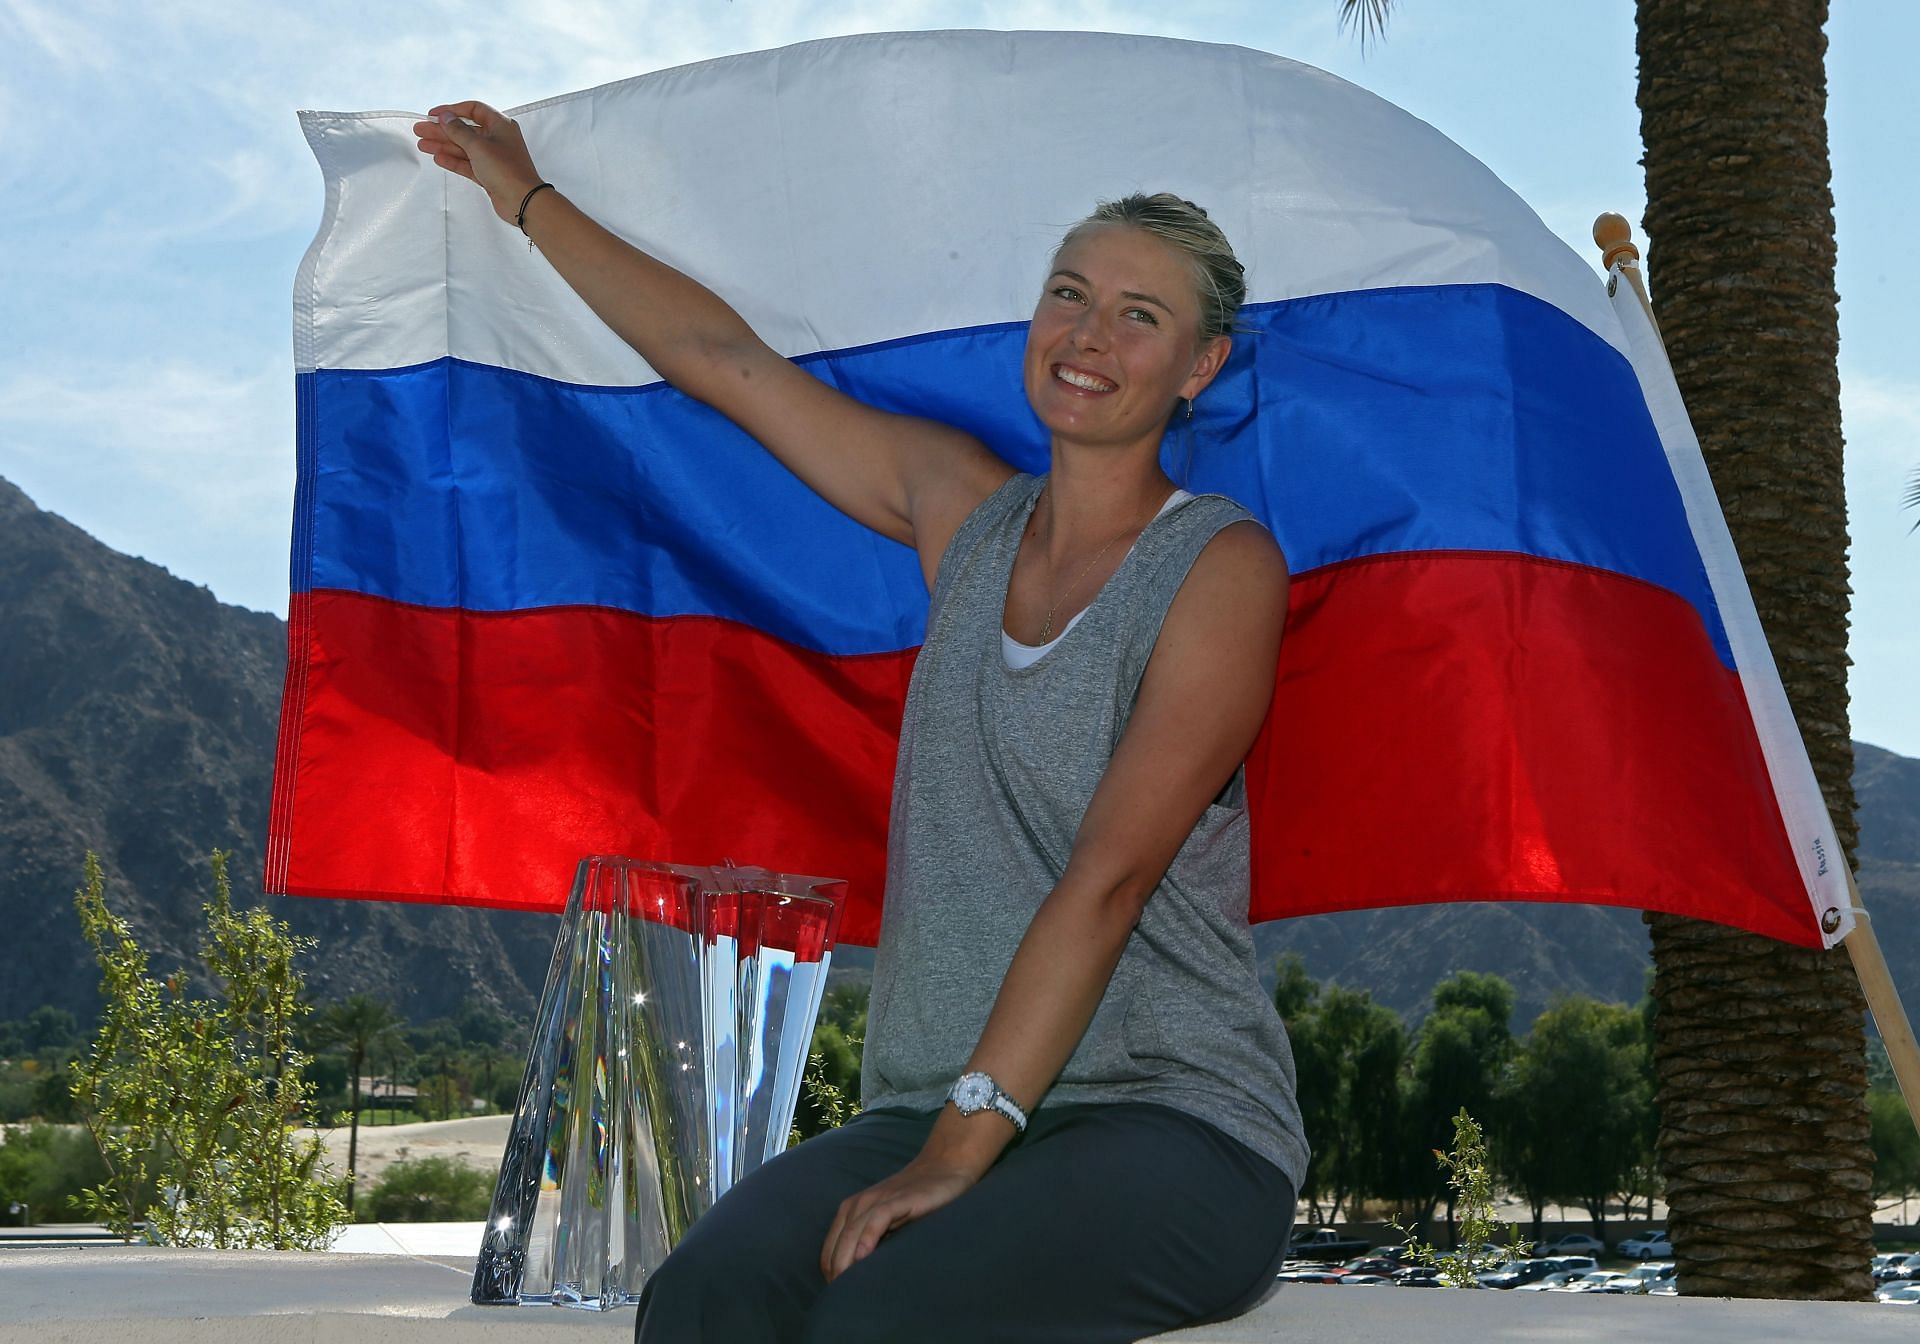 Maria Sharapova twice missed out very narrowly on the Double